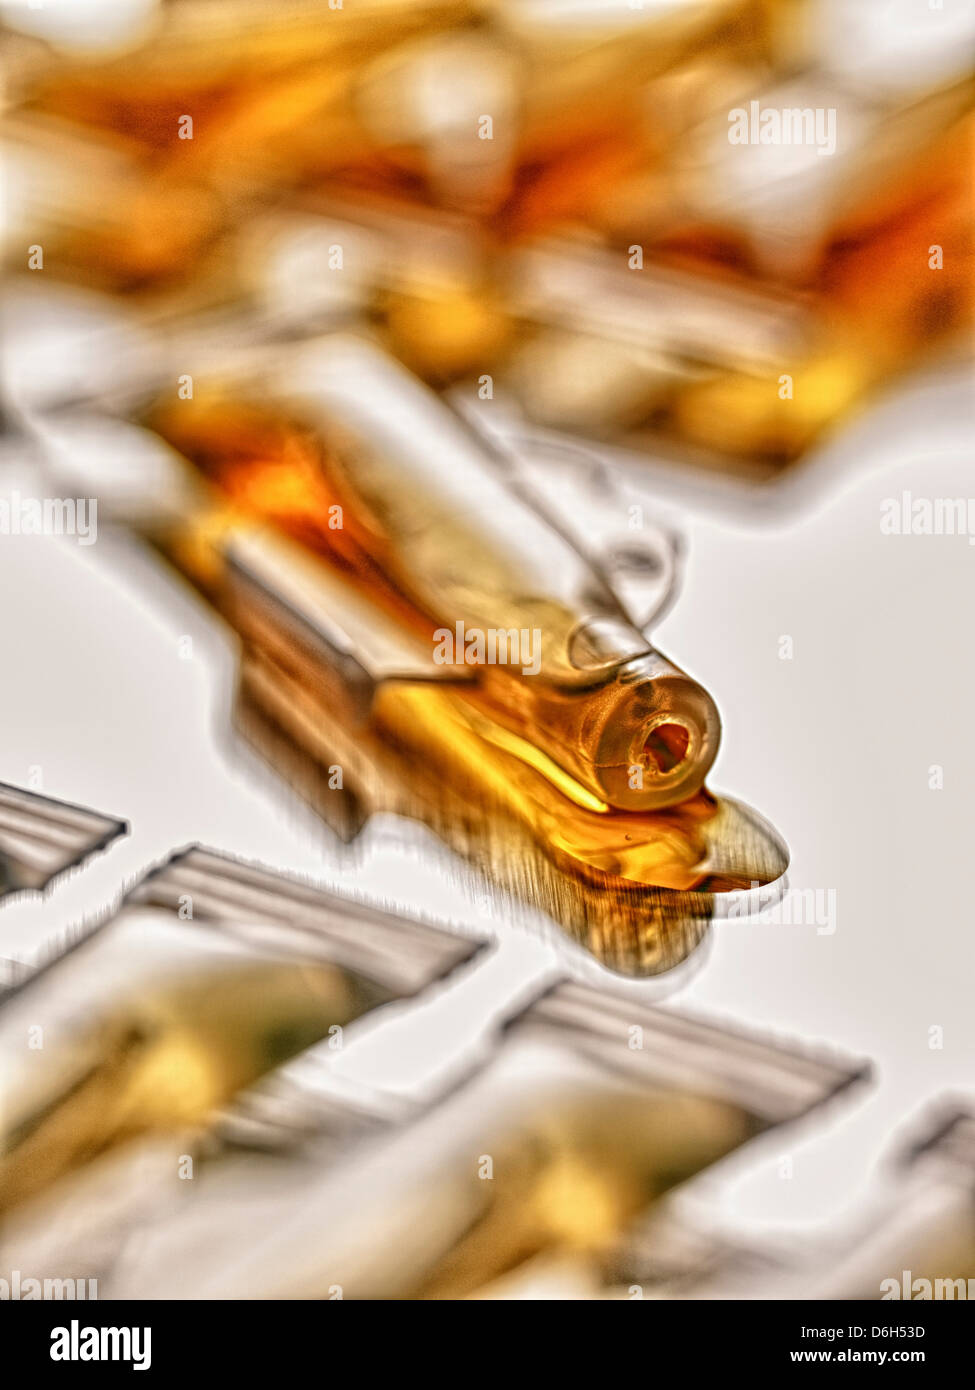 Close up of spilled vial of liquid Stock Photo